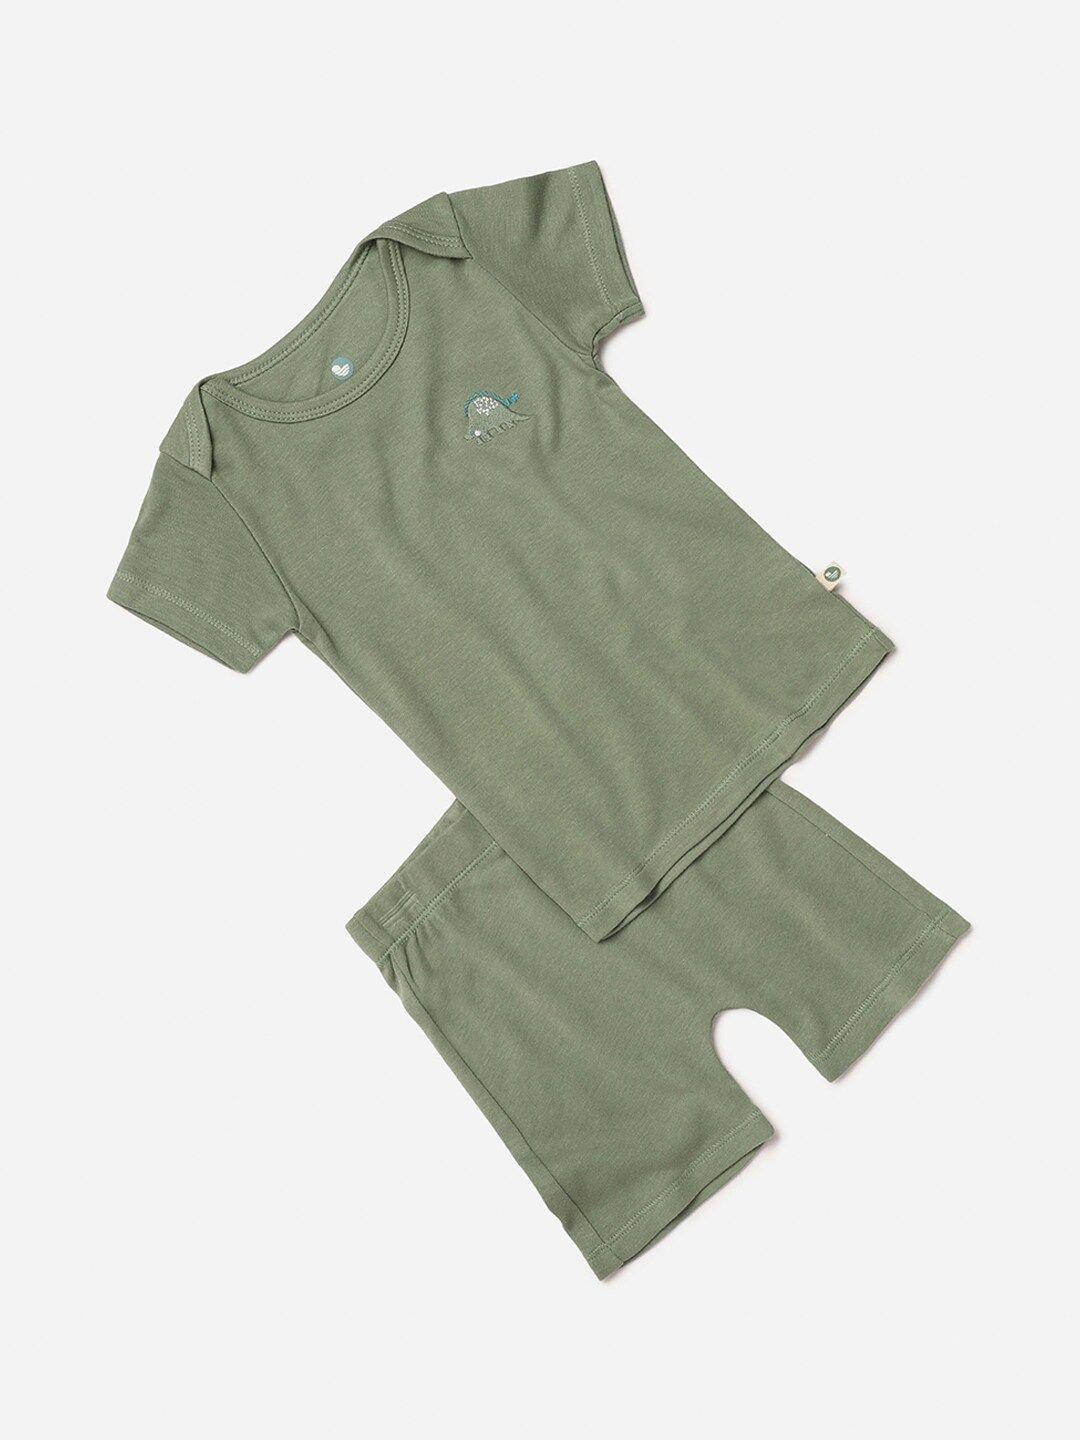 cocoon-care-unisex-kids-green-sustainable-clothing-set